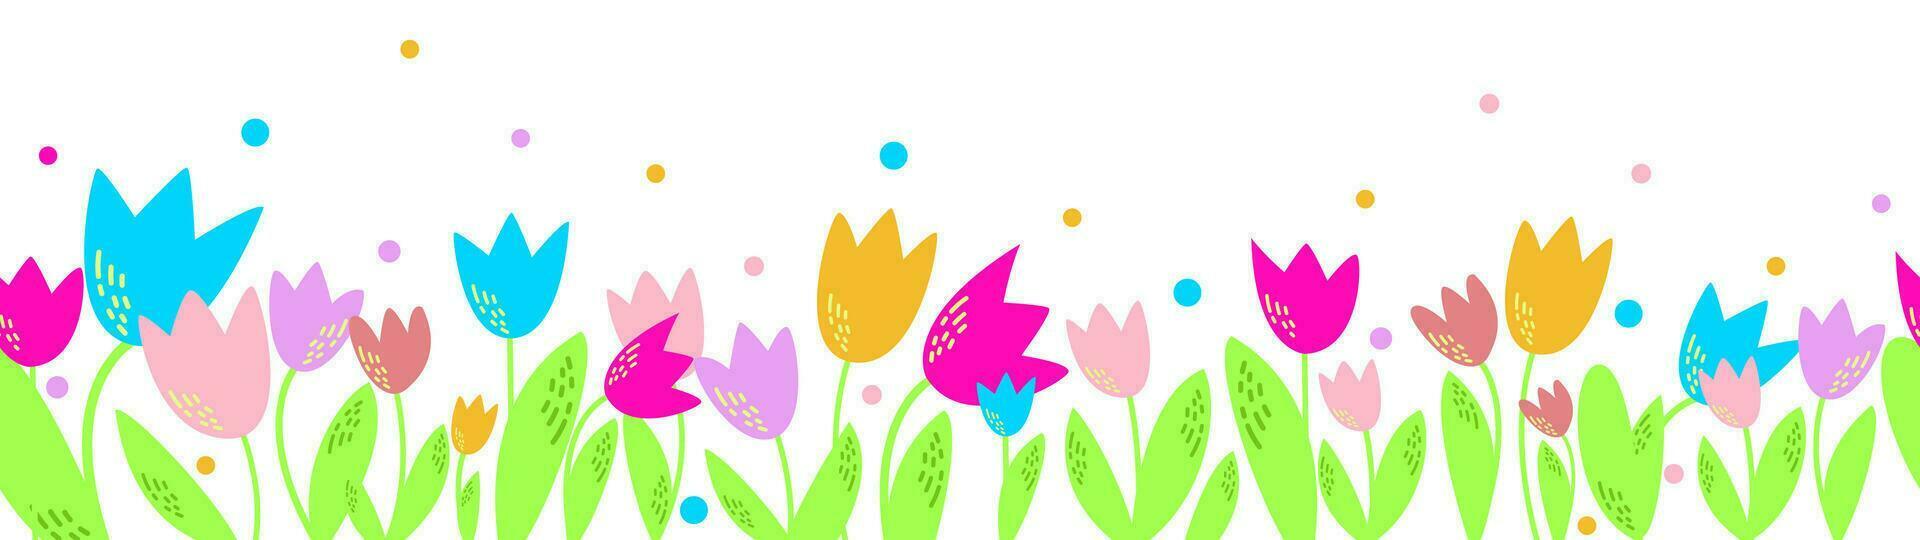 Bright floral vector seamless long background with tulips on a white.